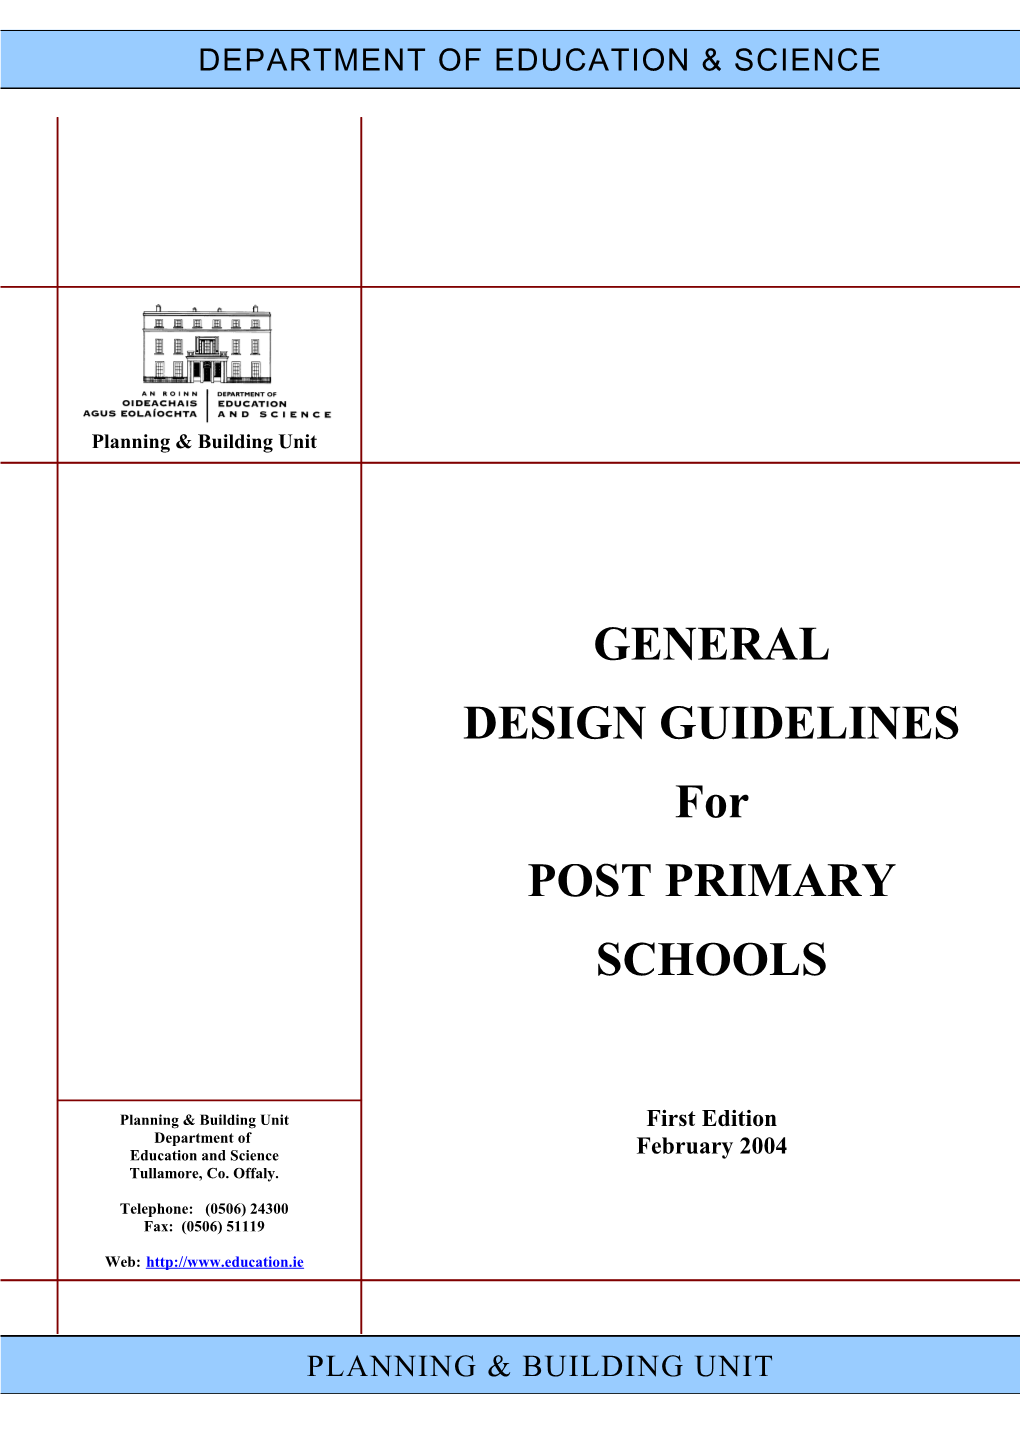 General Design Guidelines for Post Primary Schools